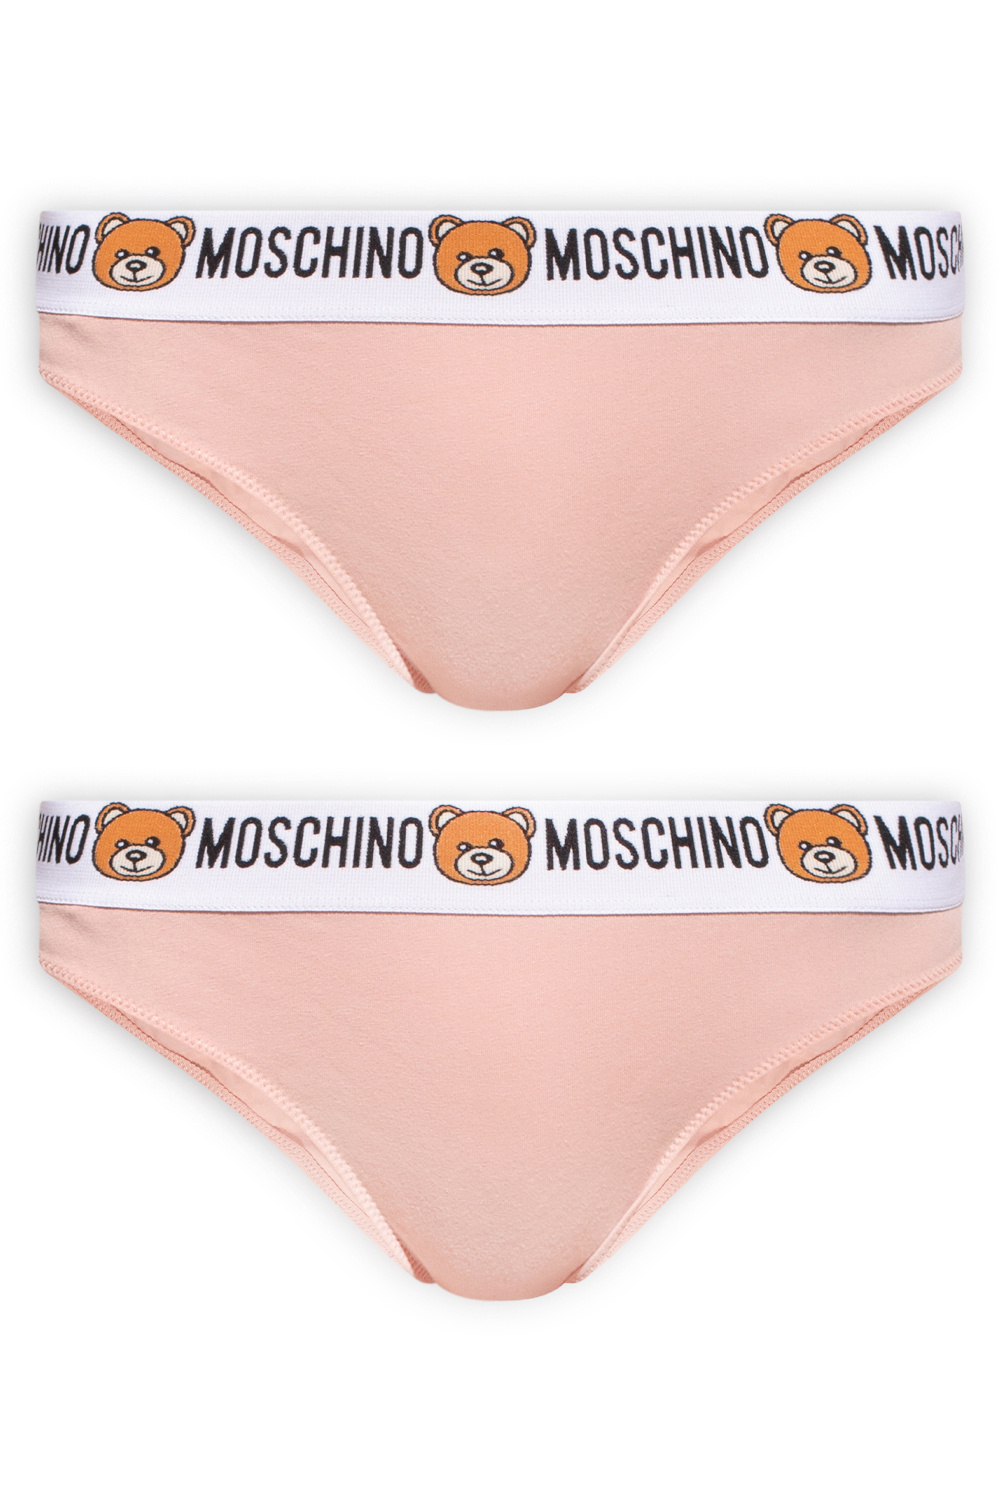 Pink Branded briefs 2-pack Moschino - Vitkac Italy